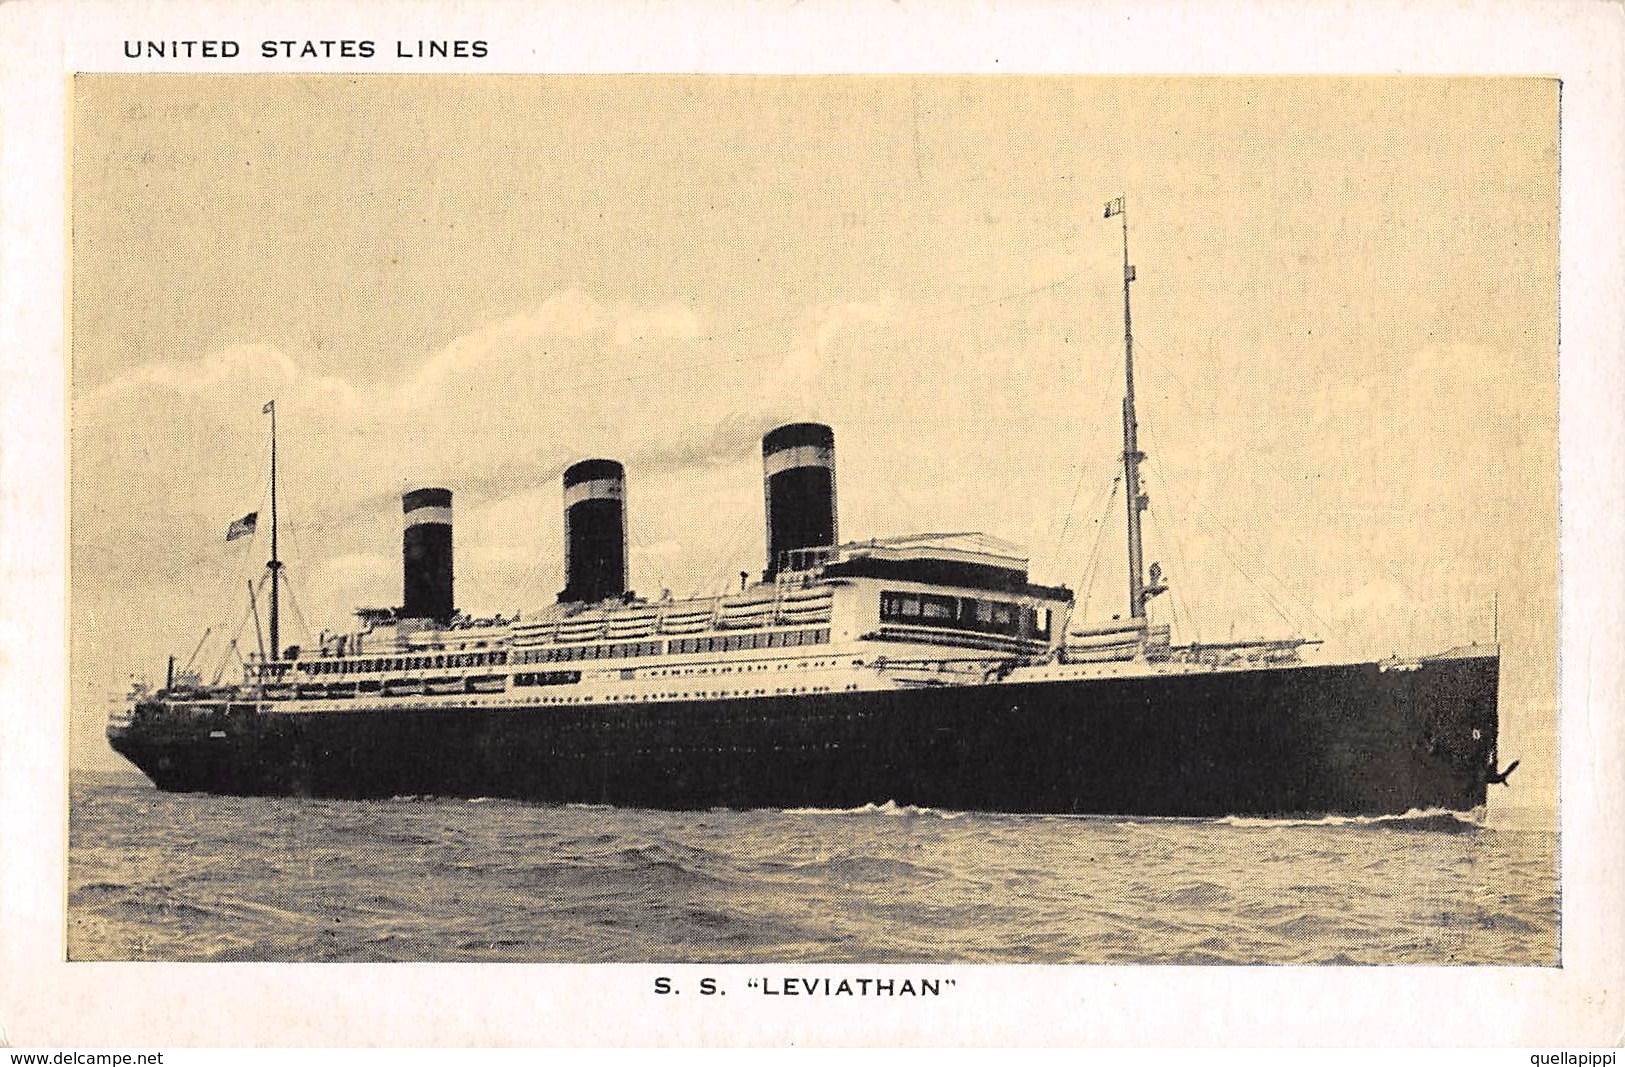 05826 "TRANSATLANTICO S.S. LEVIATHAN - 65640 TONS - INITED STATES LINES" CART SPED - Banks